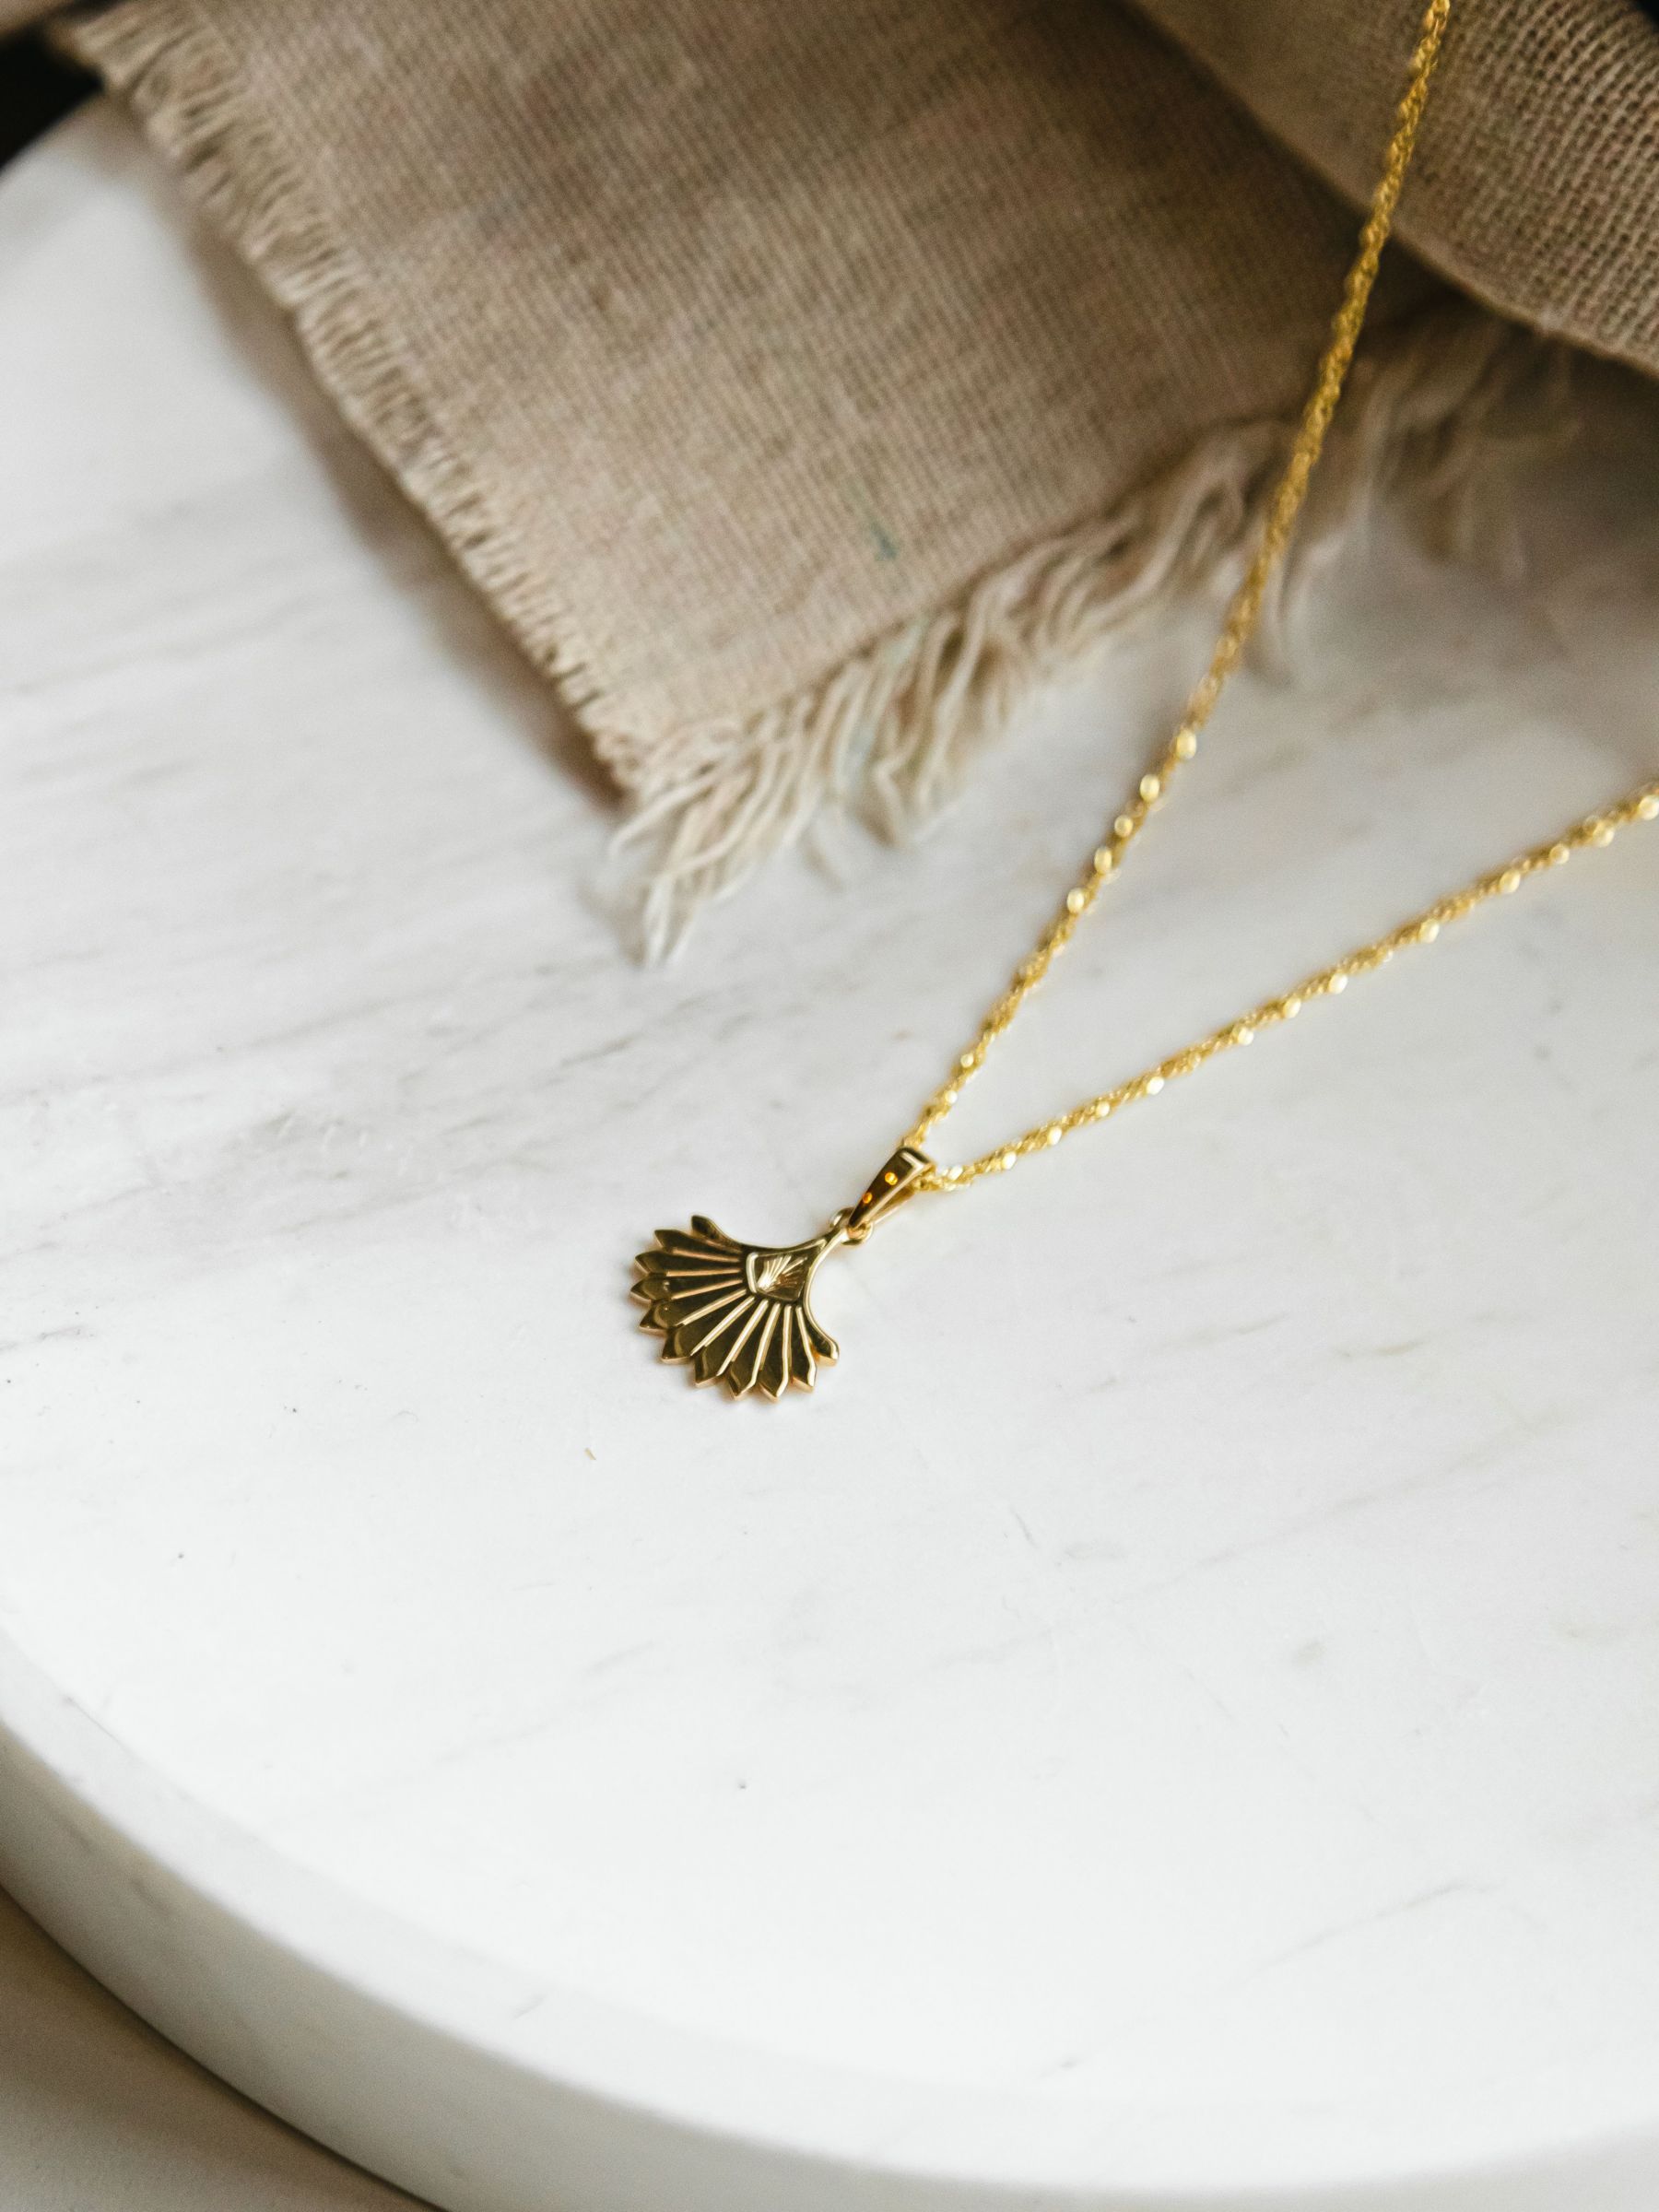 Buy Daisy London Palms Collection Open Palm Pendant Necklace, Gold Online at johnlewis.com